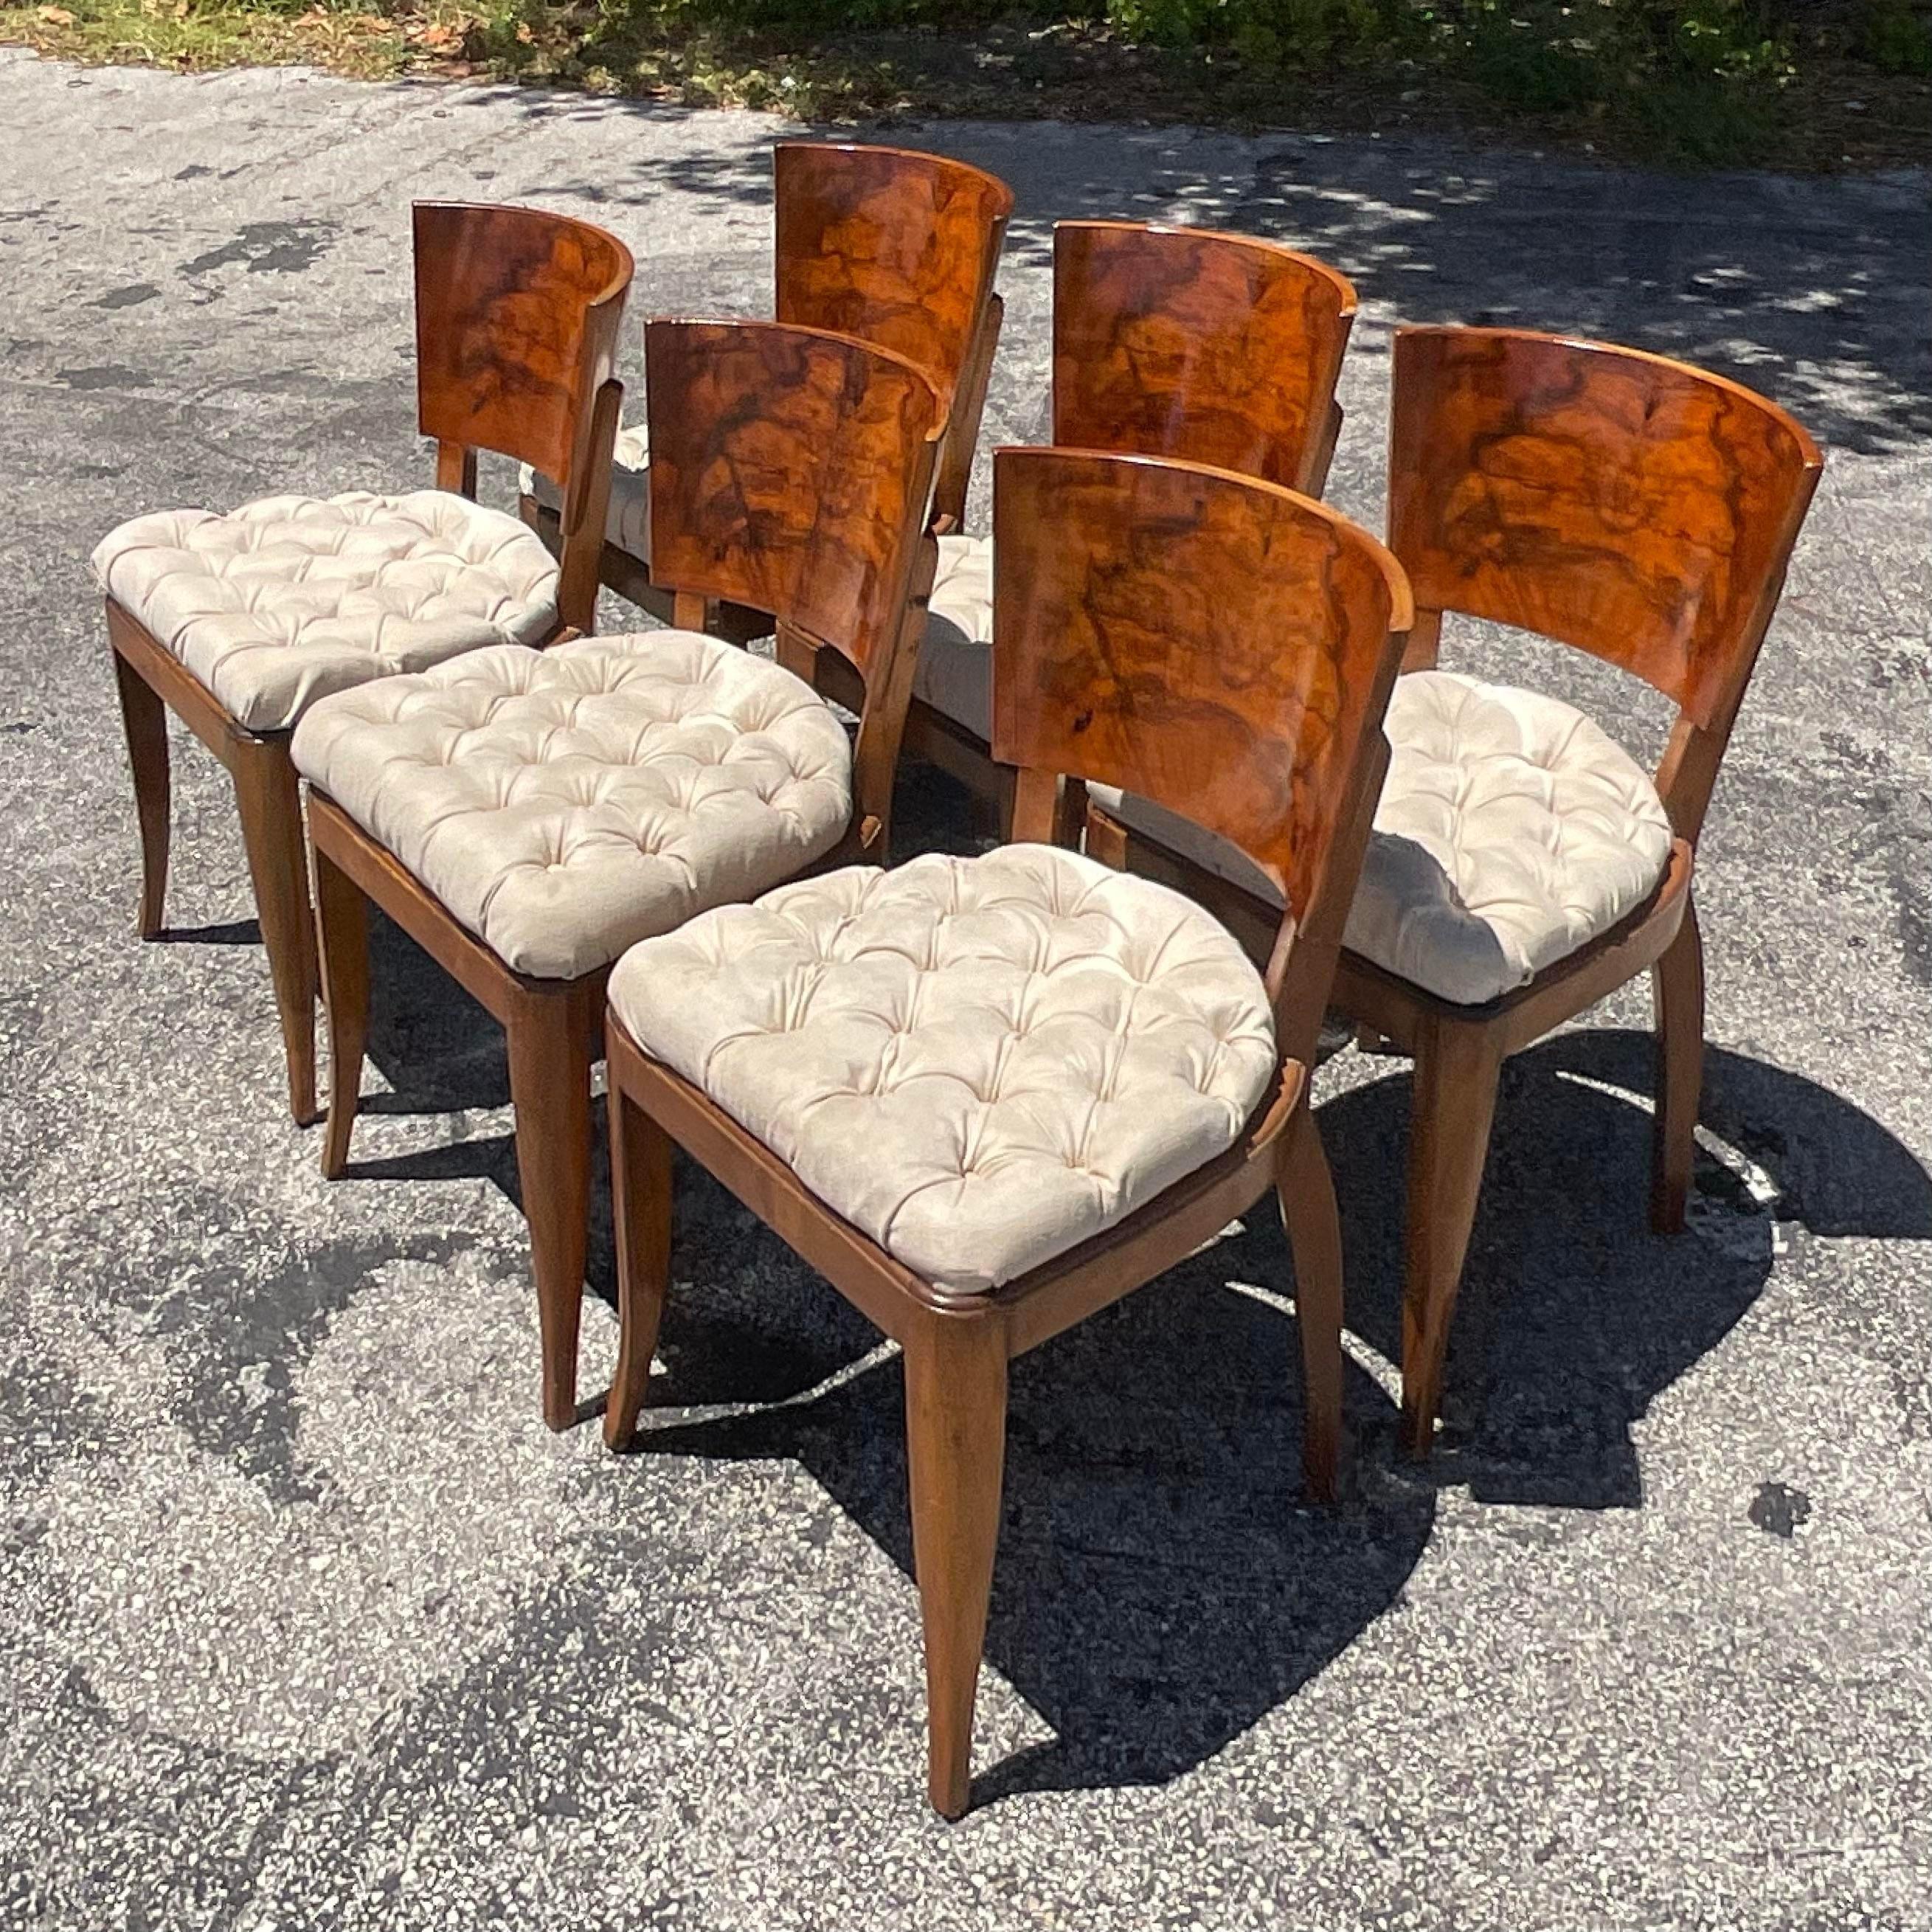 20th Century Vintage Deco Burl Wood Dining Chairs - Set of 6 For Sale